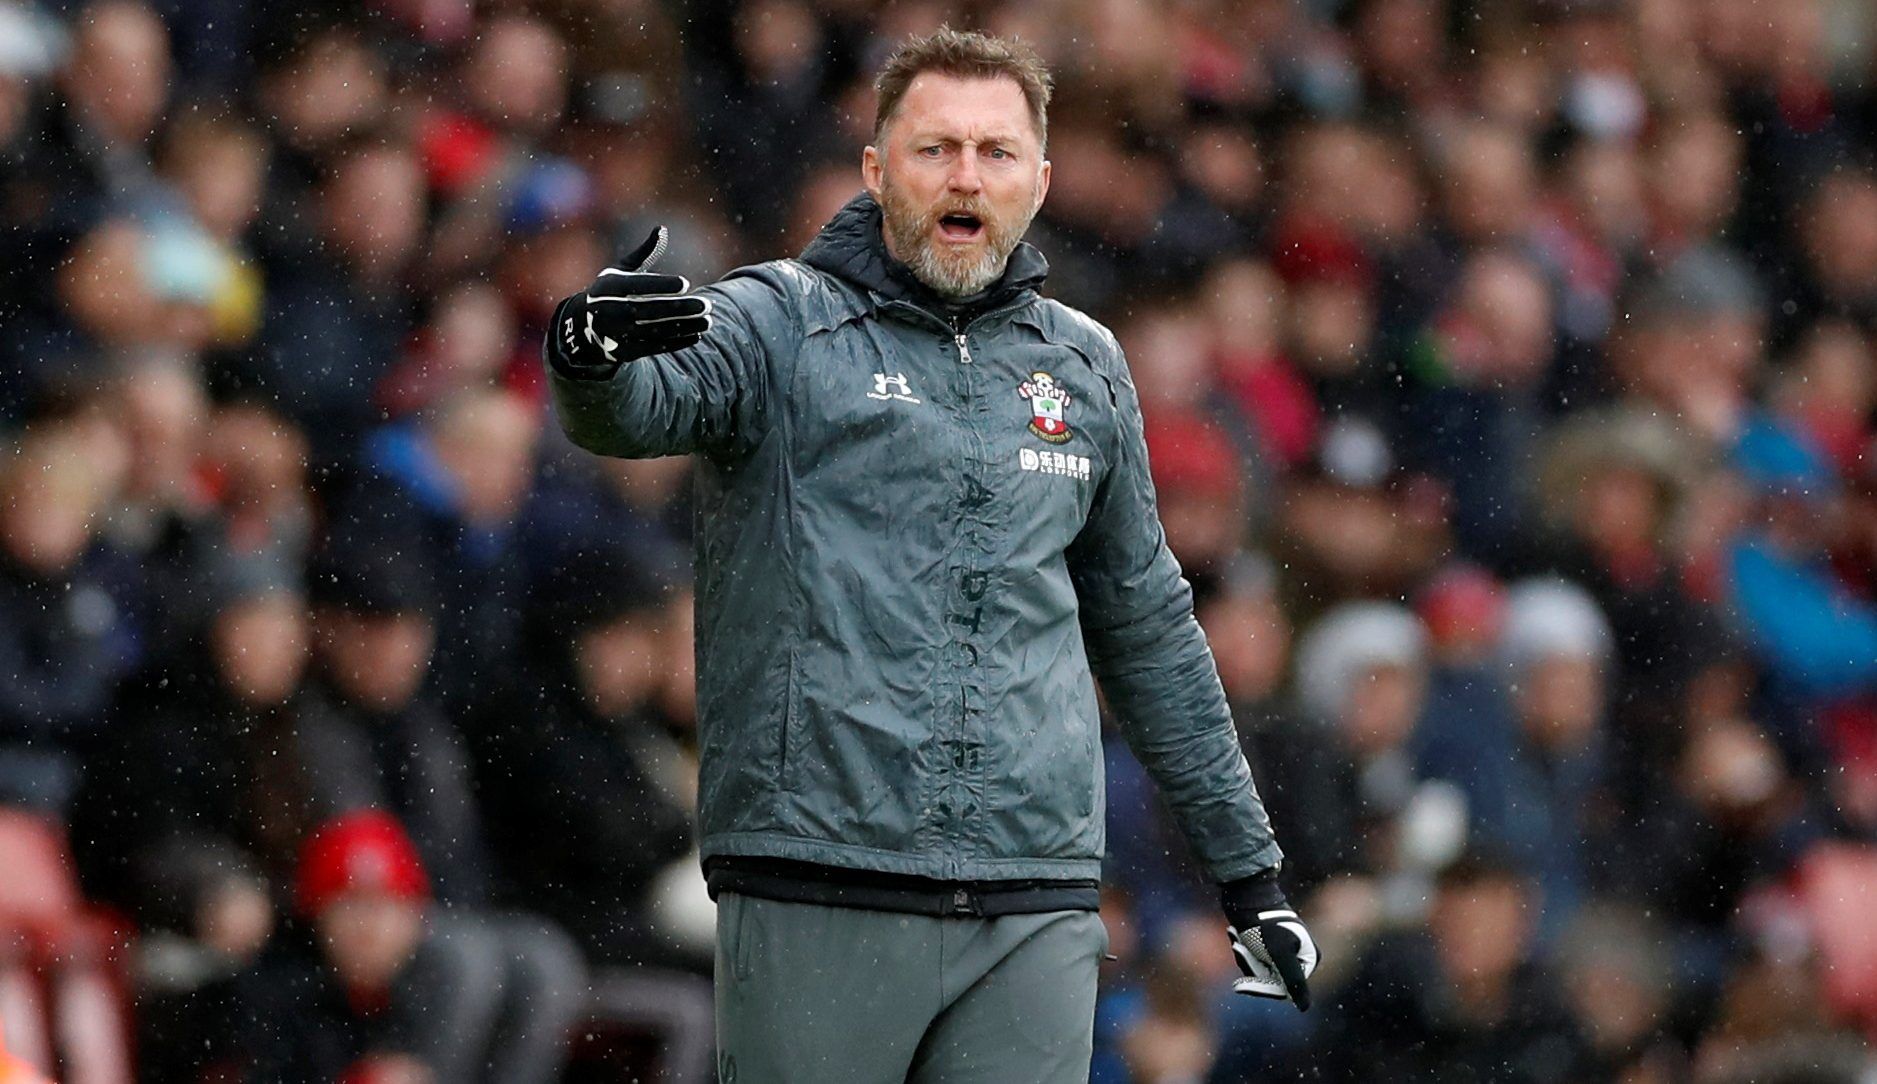 Soccer Football - Premier League - Southampton v Burnley - St Mary's Stadium, Southampton, Britain - February 15, 2020  Southampton manager Ralph Hasenhuttl    Action Images via Reuters/Matthew Childs  EDITORIAL USE ONLY. No use with unauthorized audio, video, data, fixture lists, club/league logos or 